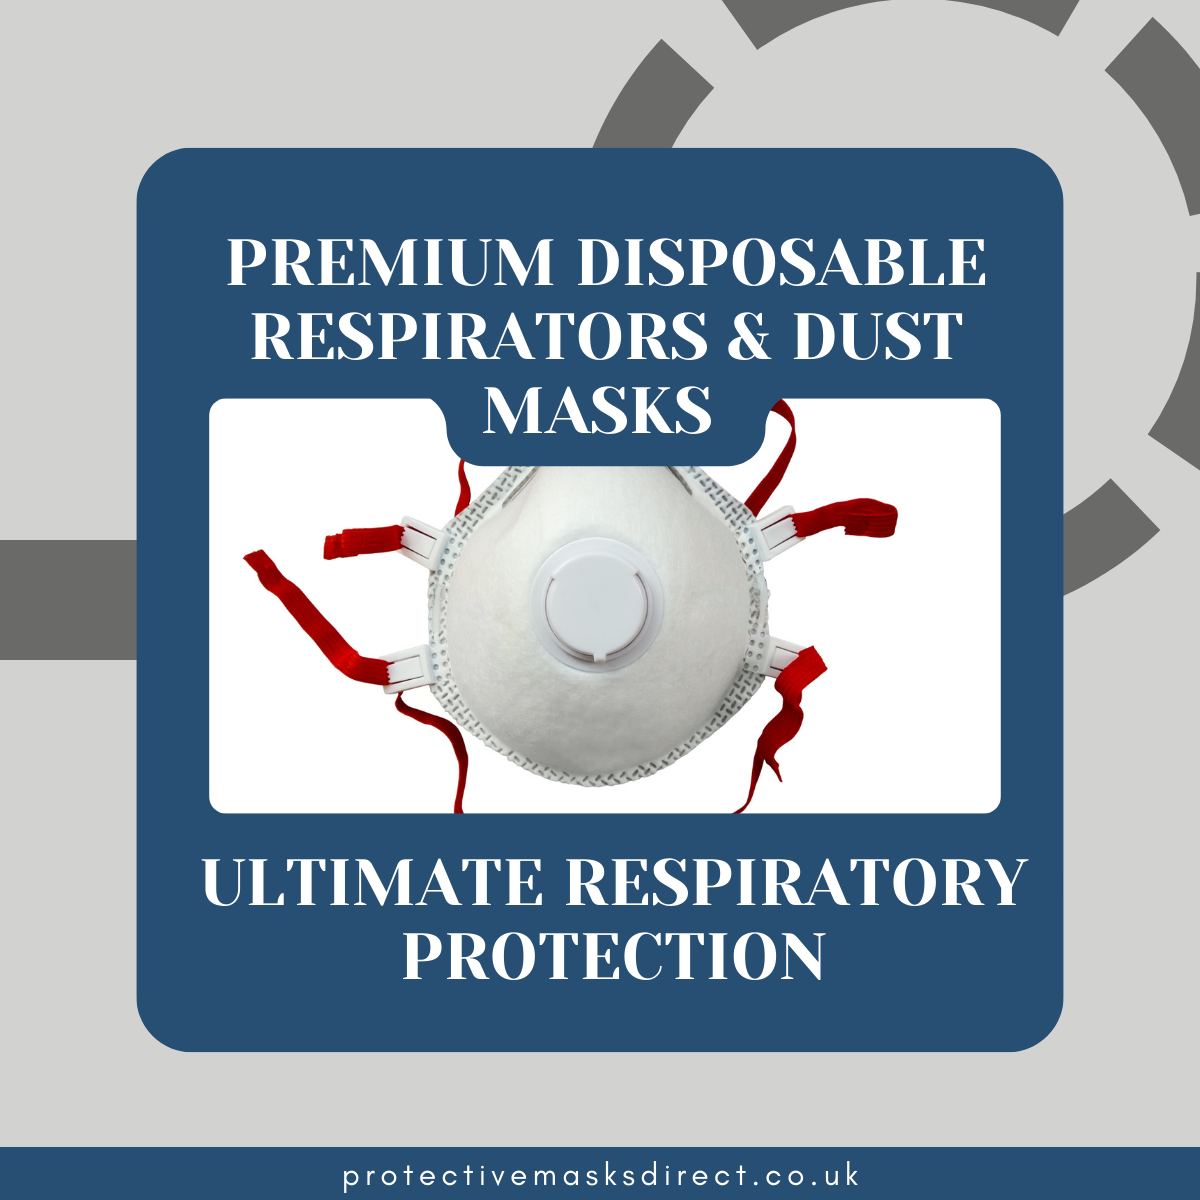 Premium Disposable Respirators & Dust Masks for Ultimate Respiratory Protection